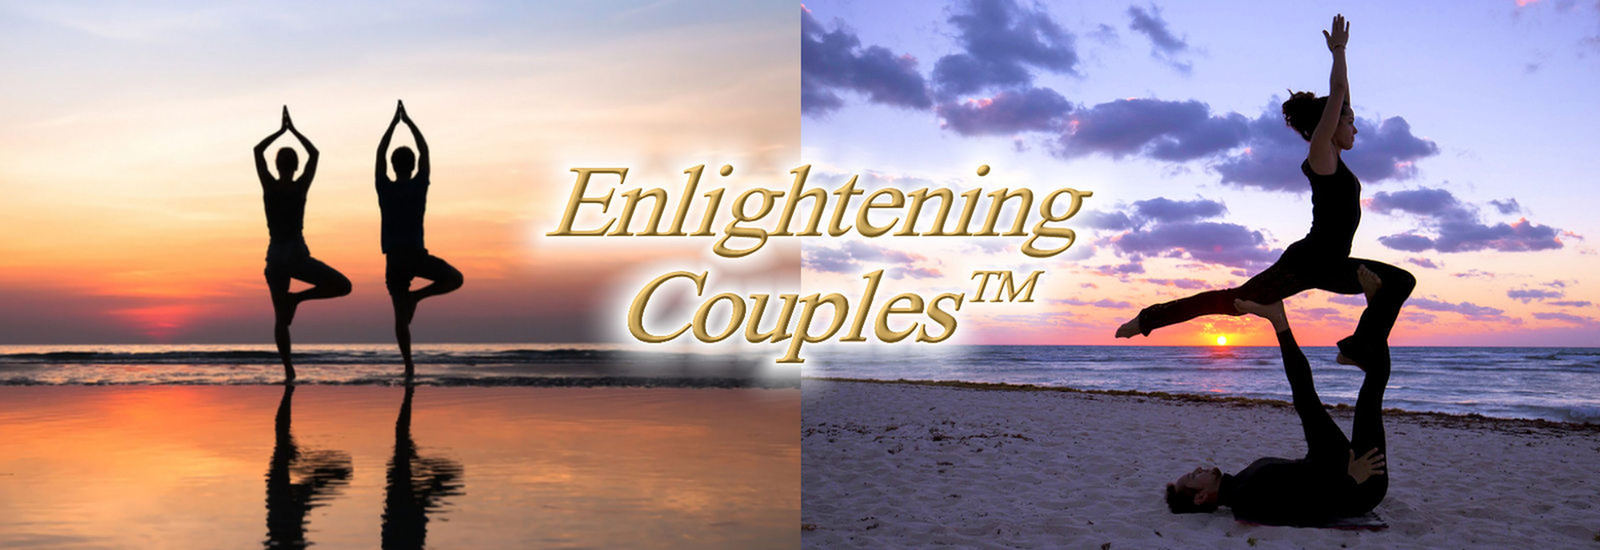 Enlightening Couples - Two Couples doing Beach Yoga